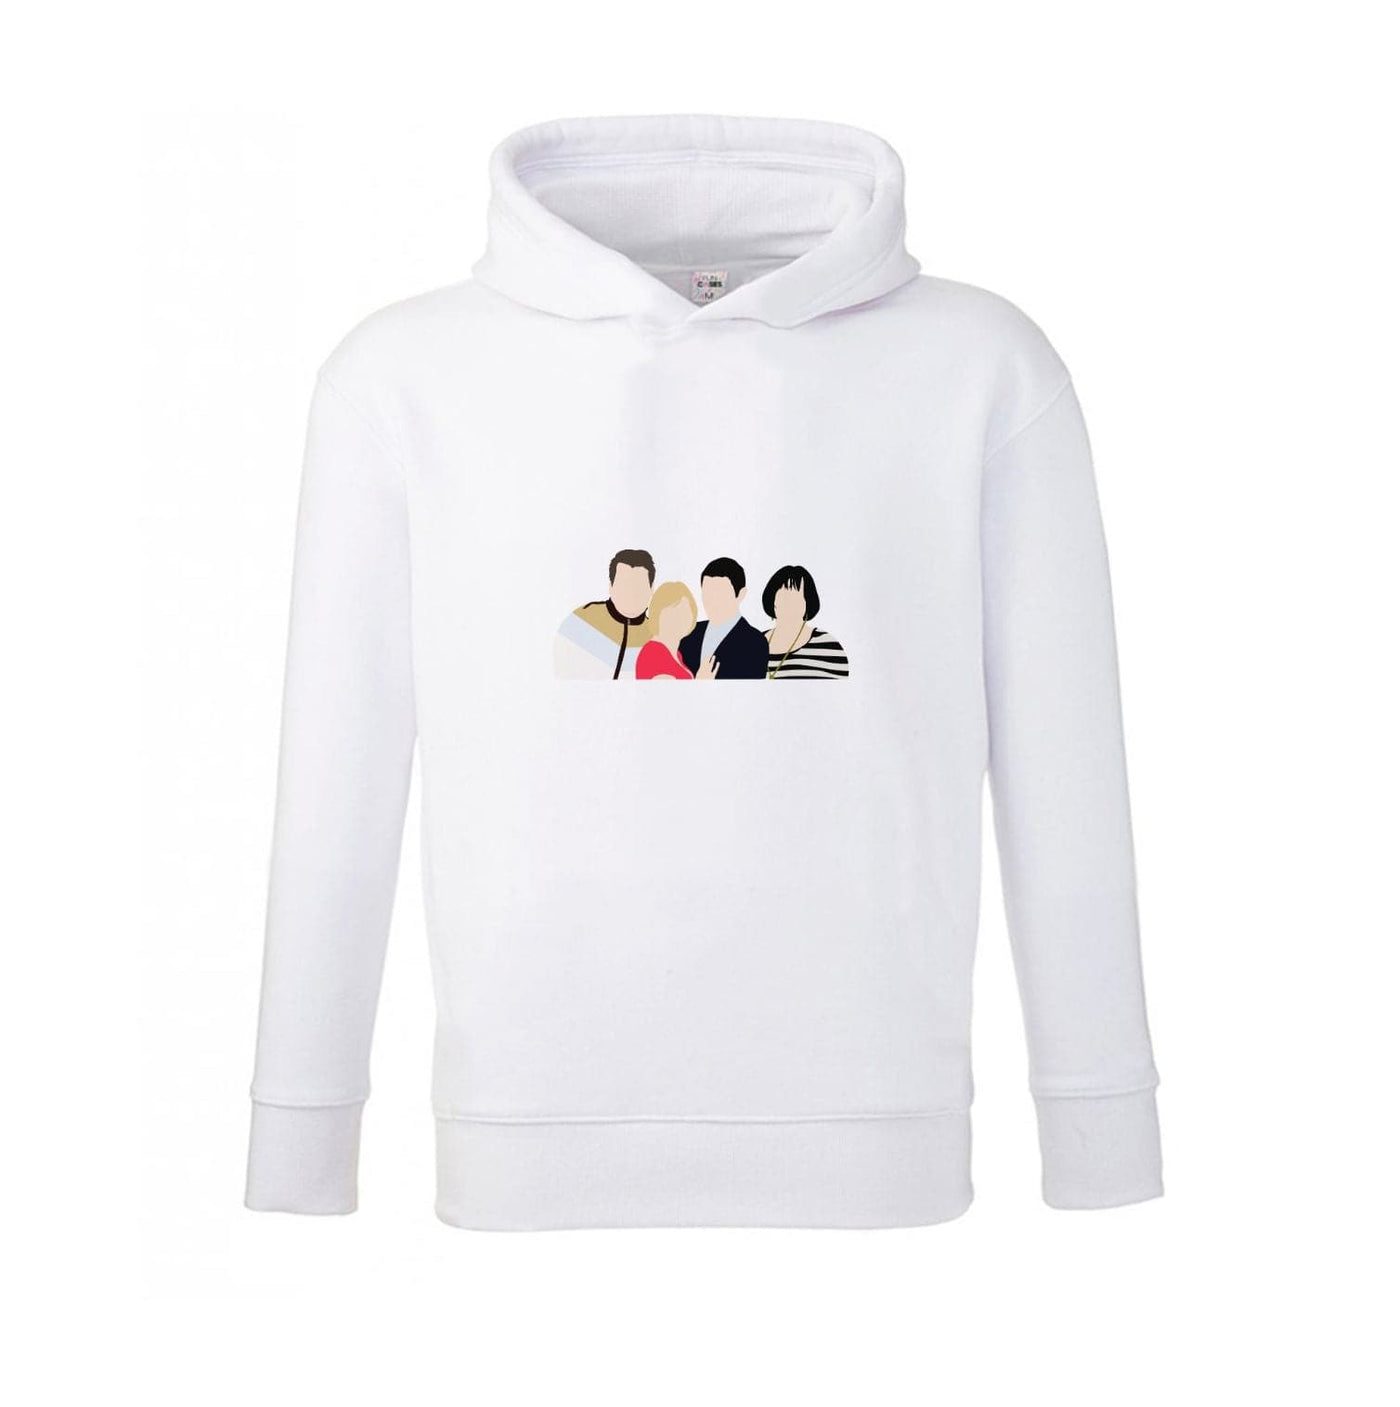 Cast - Gavin And Stacey Kids Hoodie